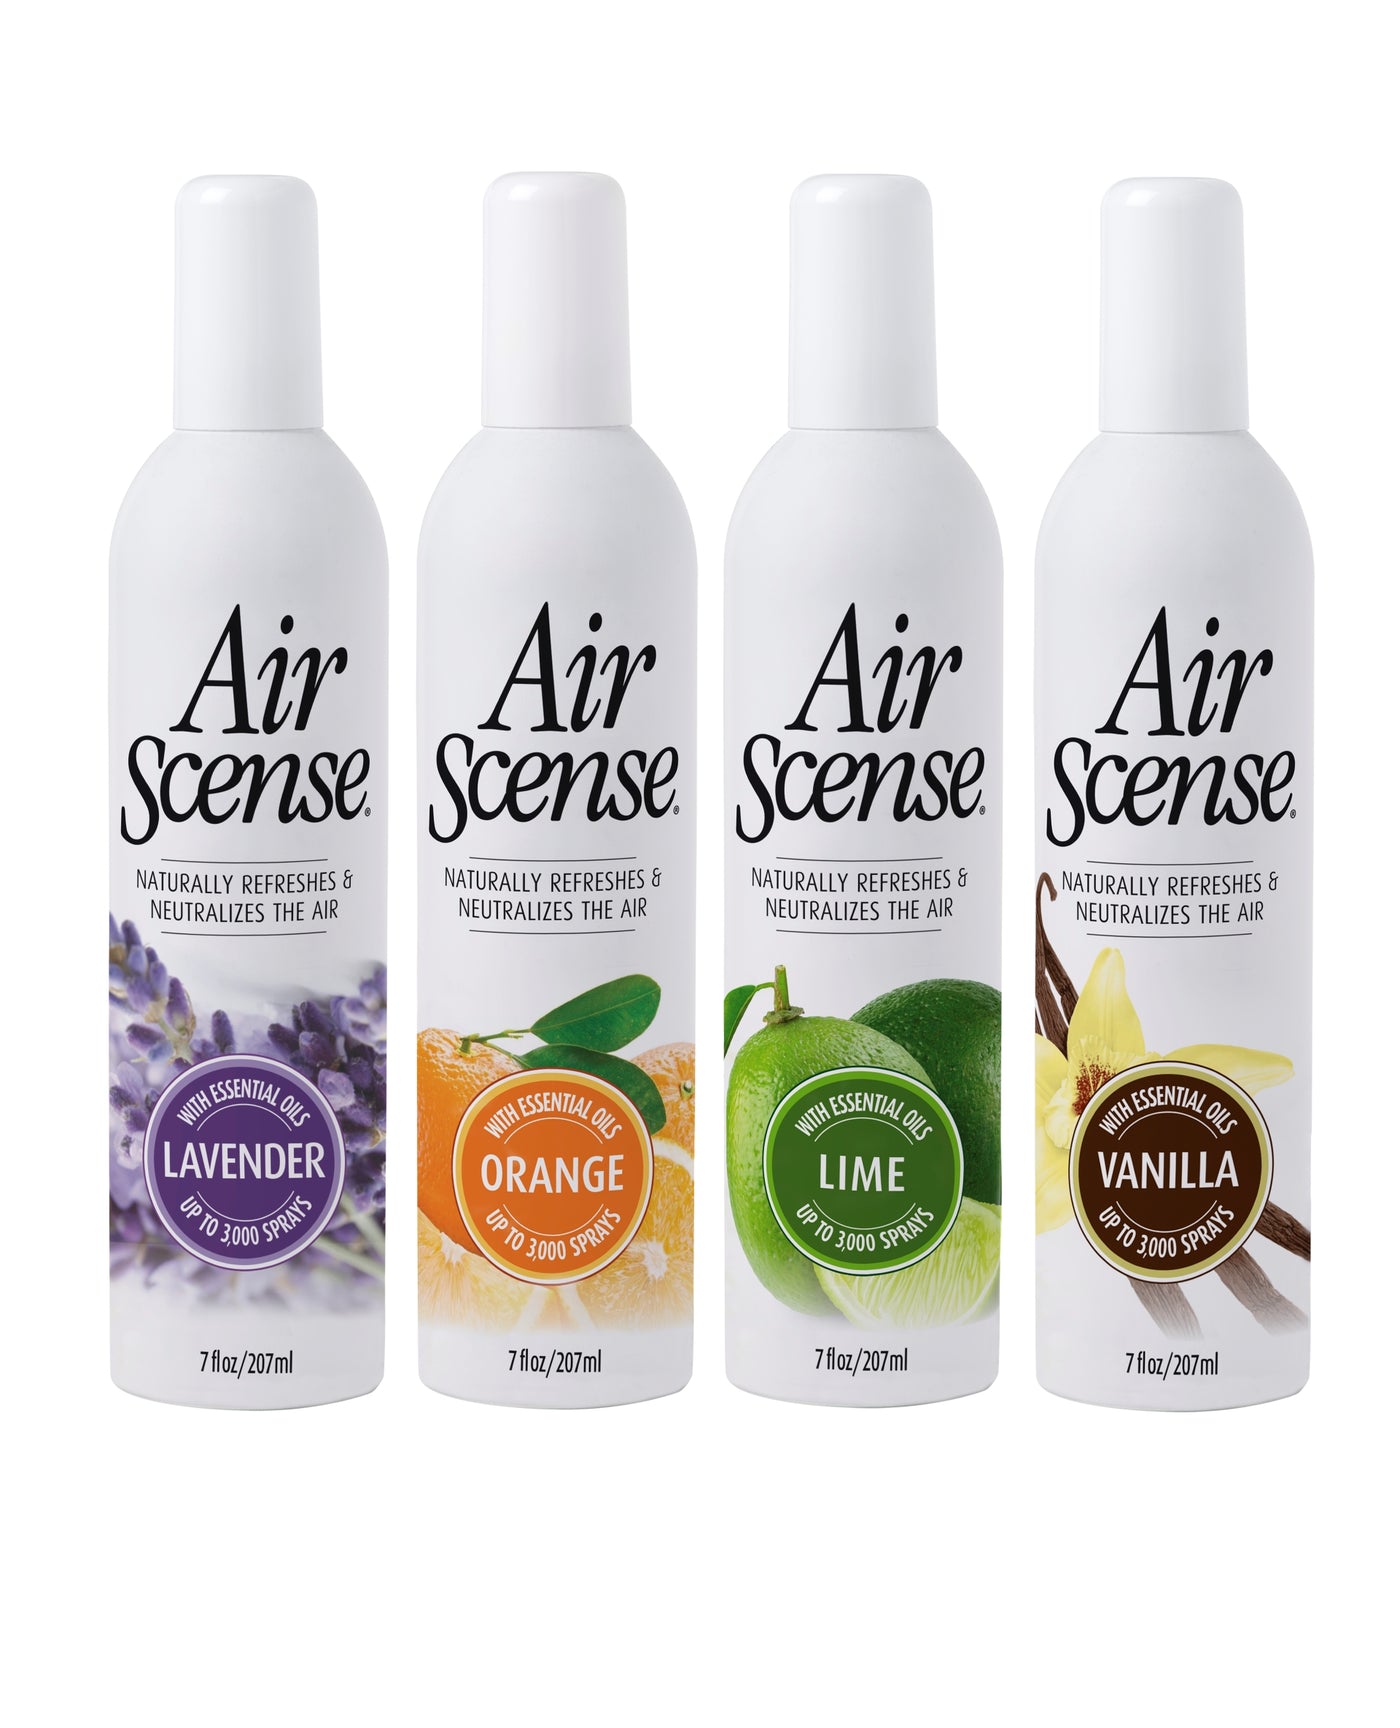 Air Scense | 4 Pack | Soothing Lavender Spray For Relaxation And Calmness, Zesty Orange Spray For An Energizing And Refreshing Aroma, Refreshing Lime Spray For A Tangy And Invigorating Scent, Indulgent Vanilla Spray For A Sweet And Comforting Fragrance | Best Toilet Before You Go Spray